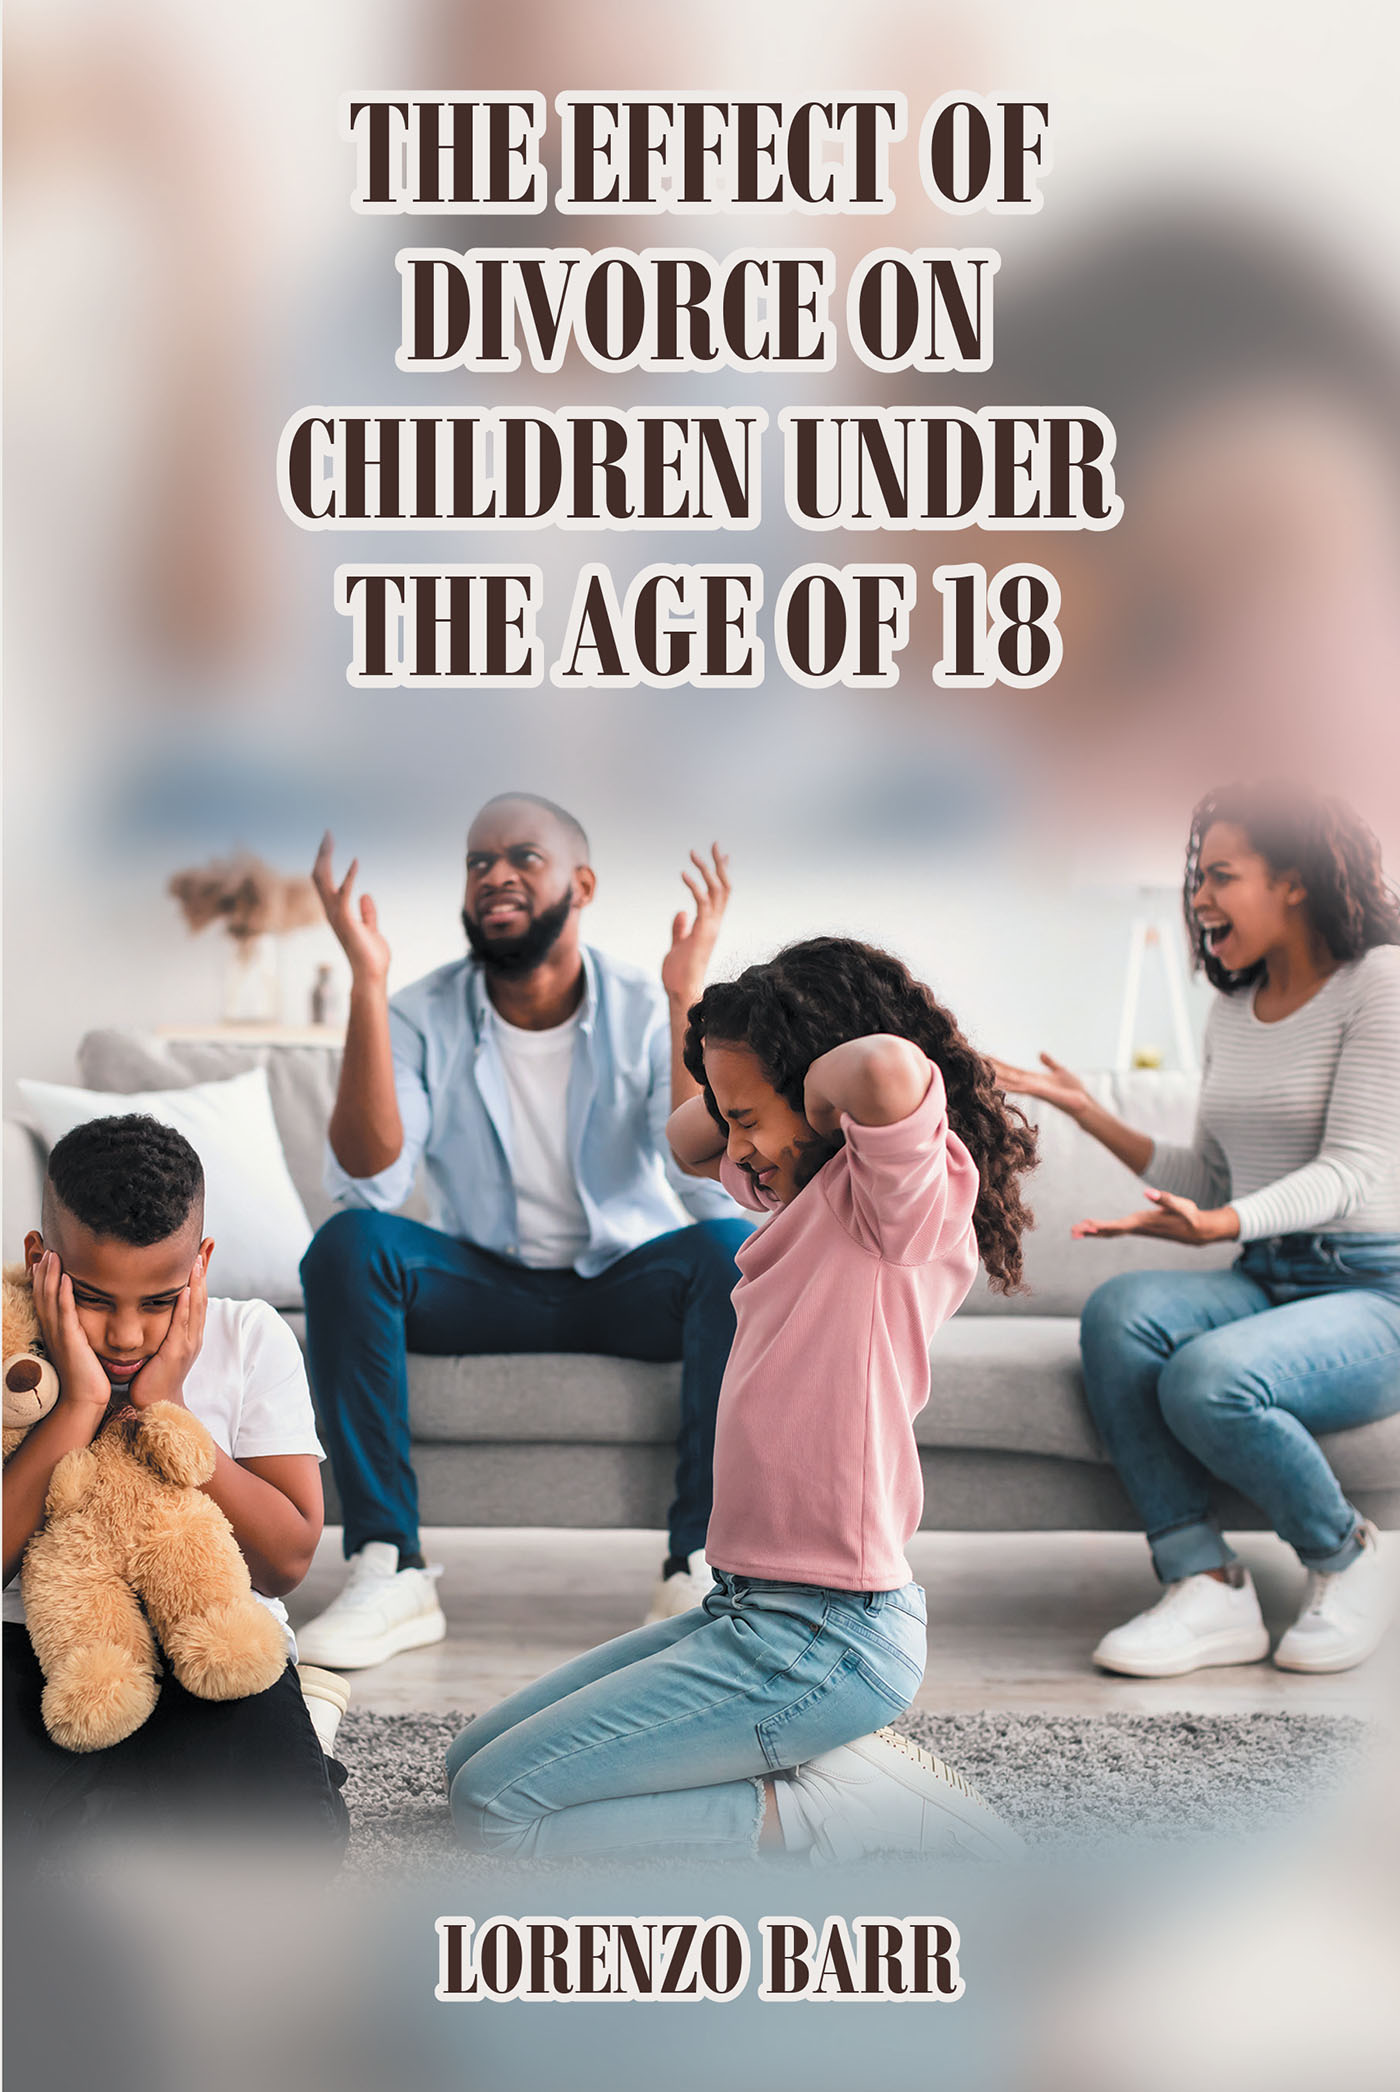 Author Lorenzo Barr’s New Book, "The Effect of Divorce on Children Under the Age of 18," Explores the Lasting Impacts of the Collapse of Marriage & Rise in Divorce Rates